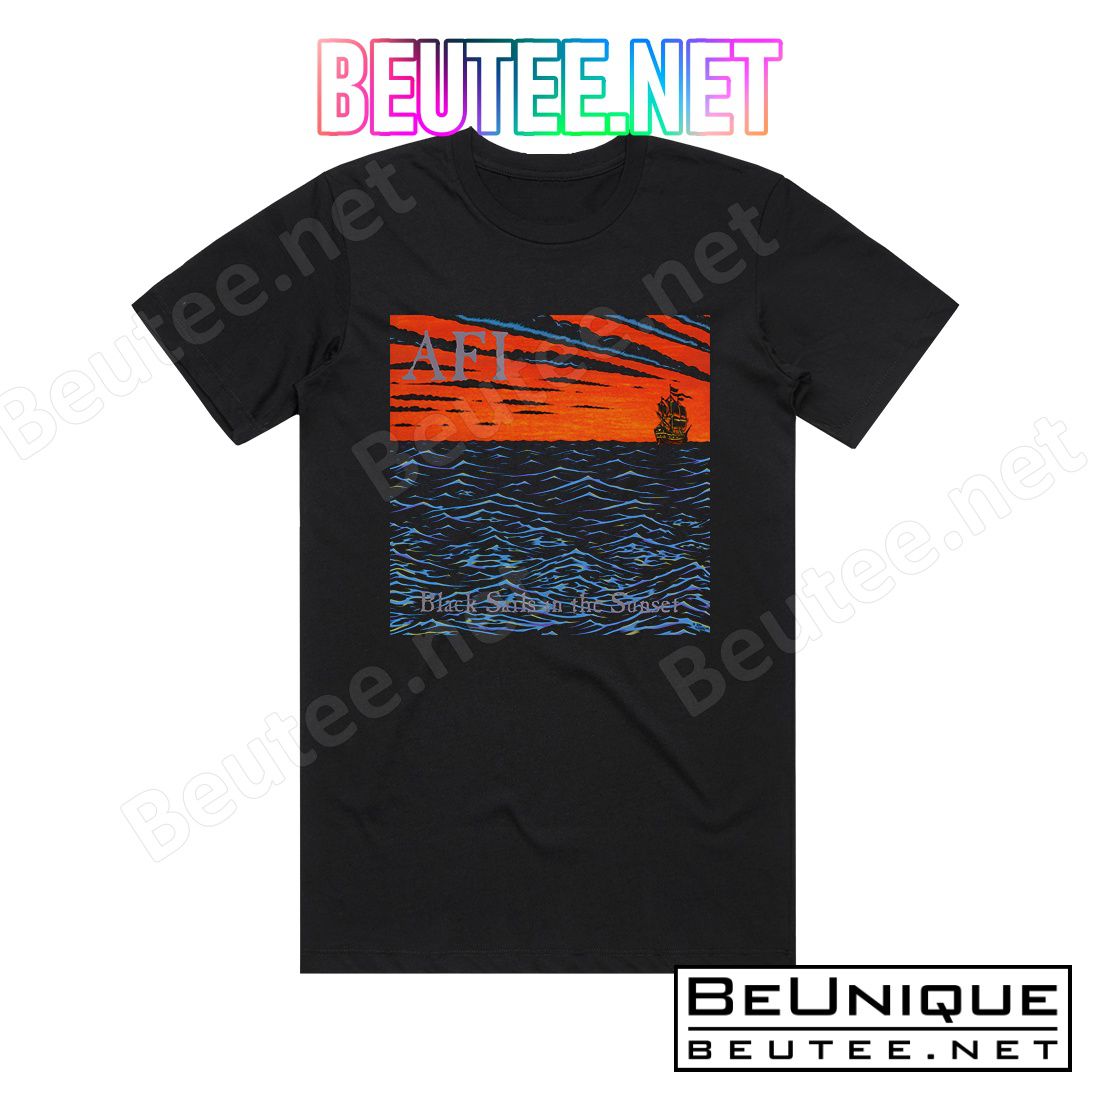 AFI Sails In The Sunset 2 Album Cover T-shirt